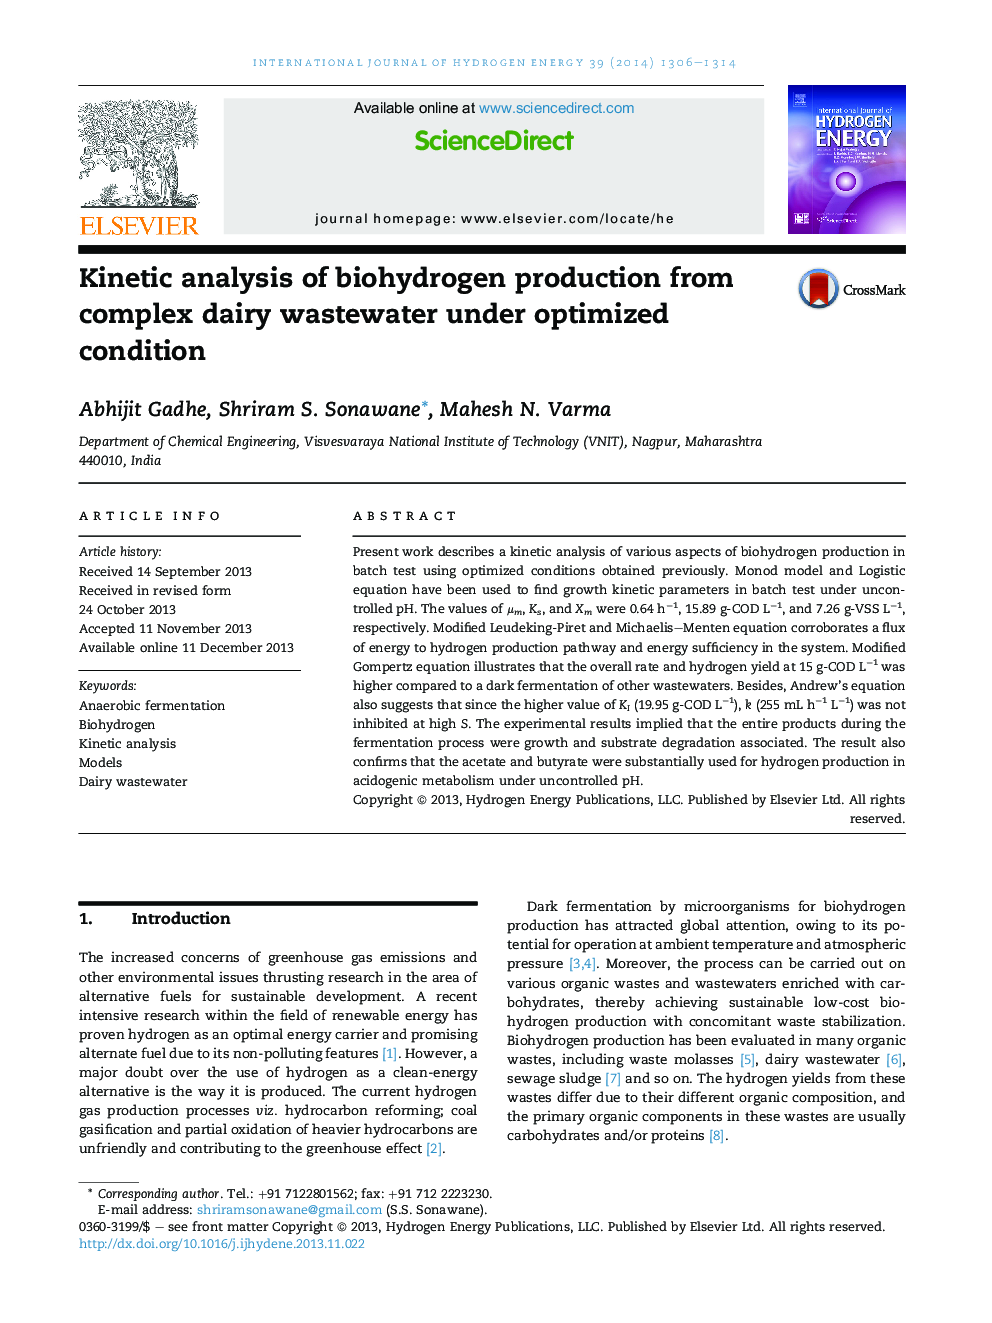 Kinetic analysis of biohydrogen production from complex dairy wastewater under optimized condition